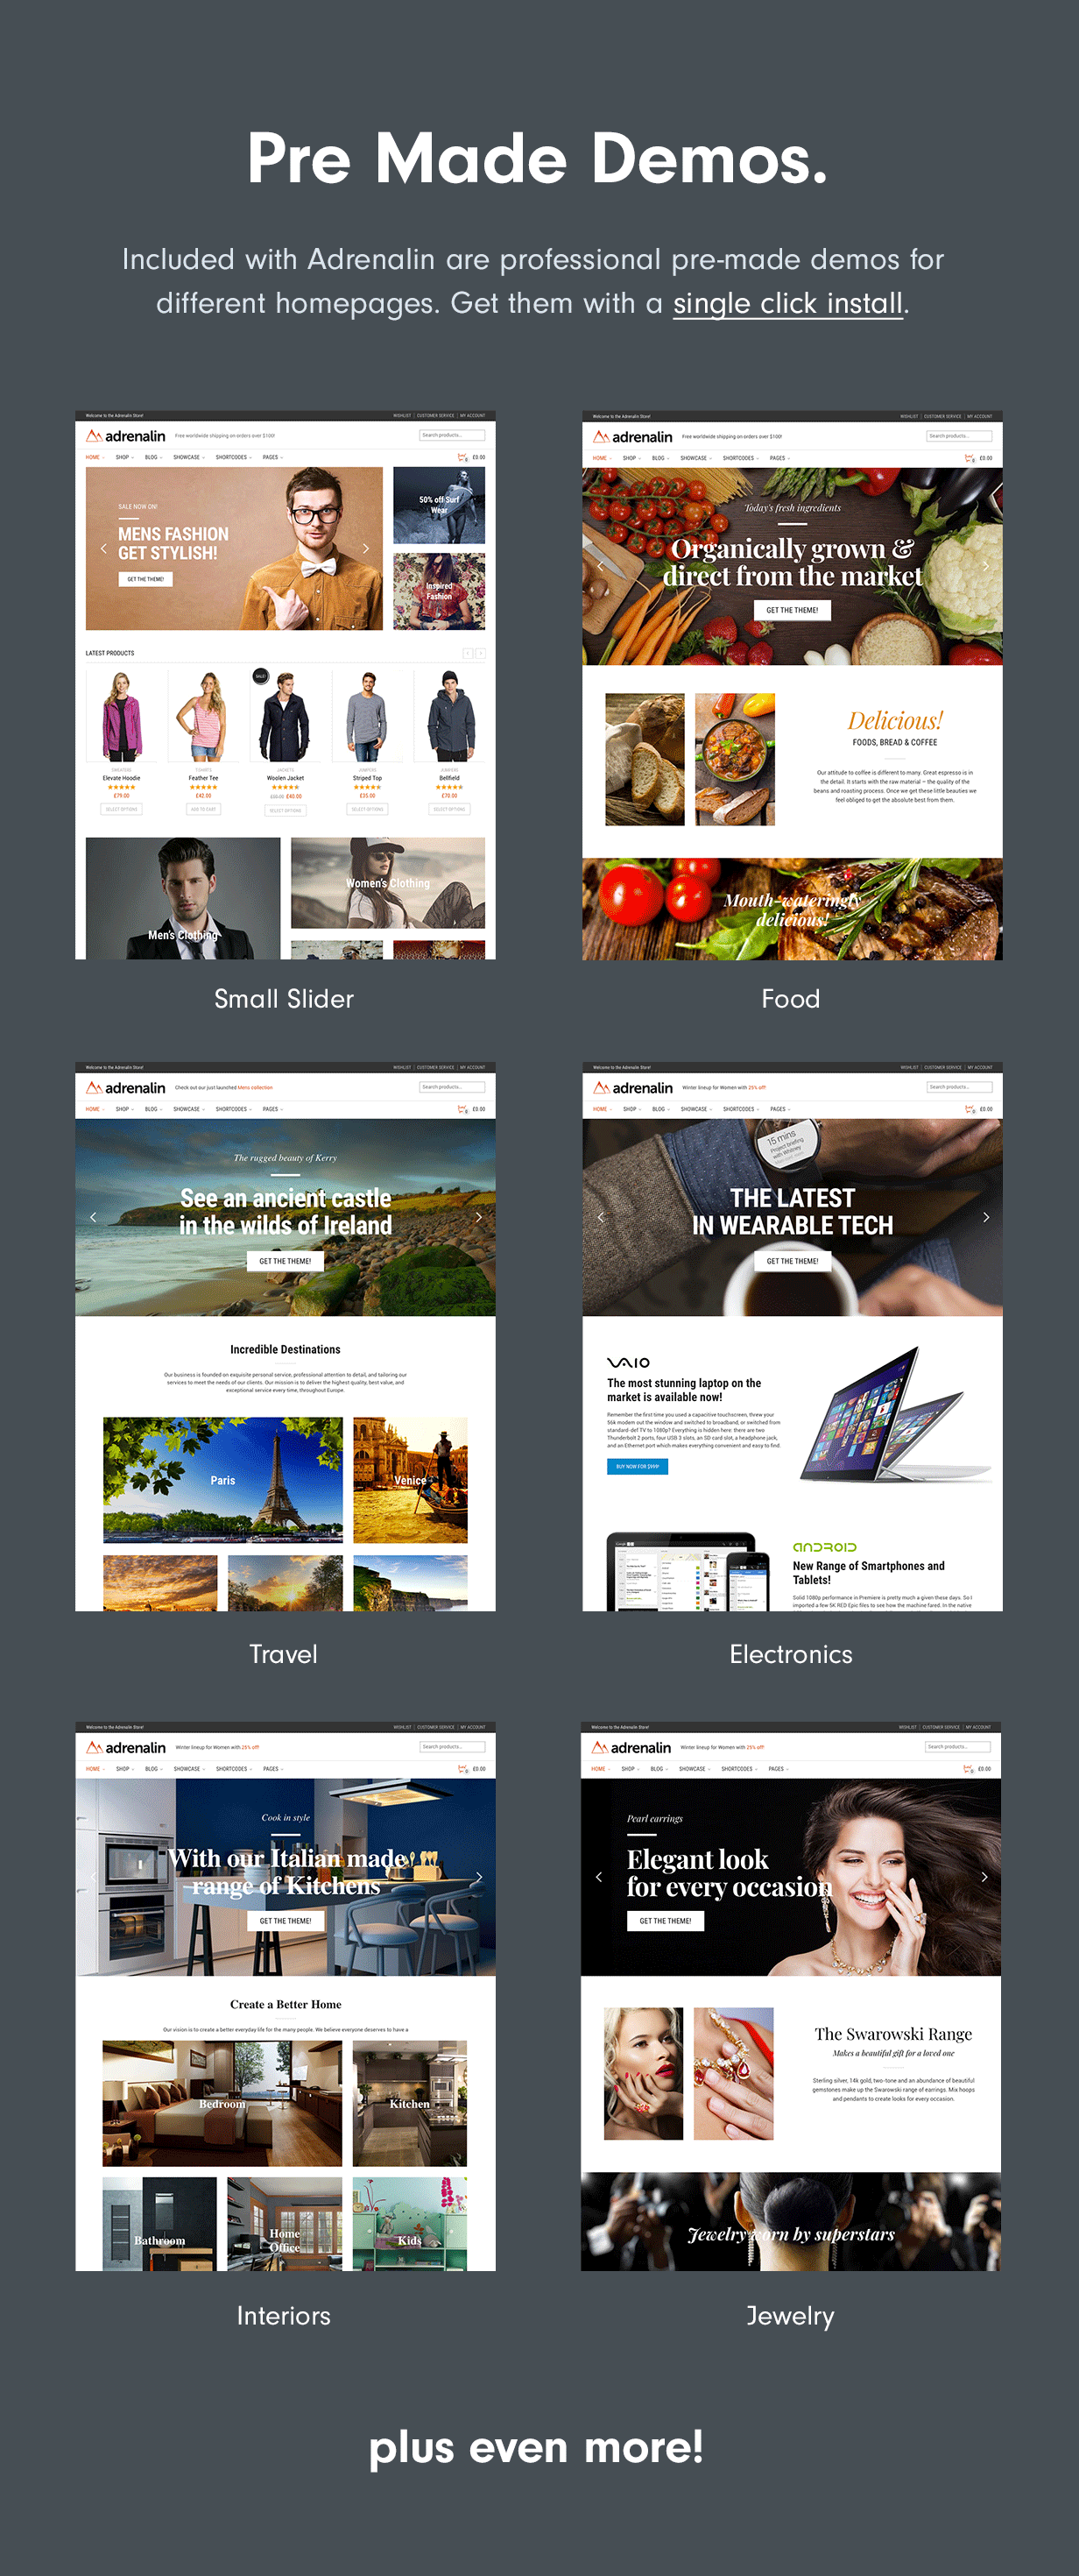 10 Homepages